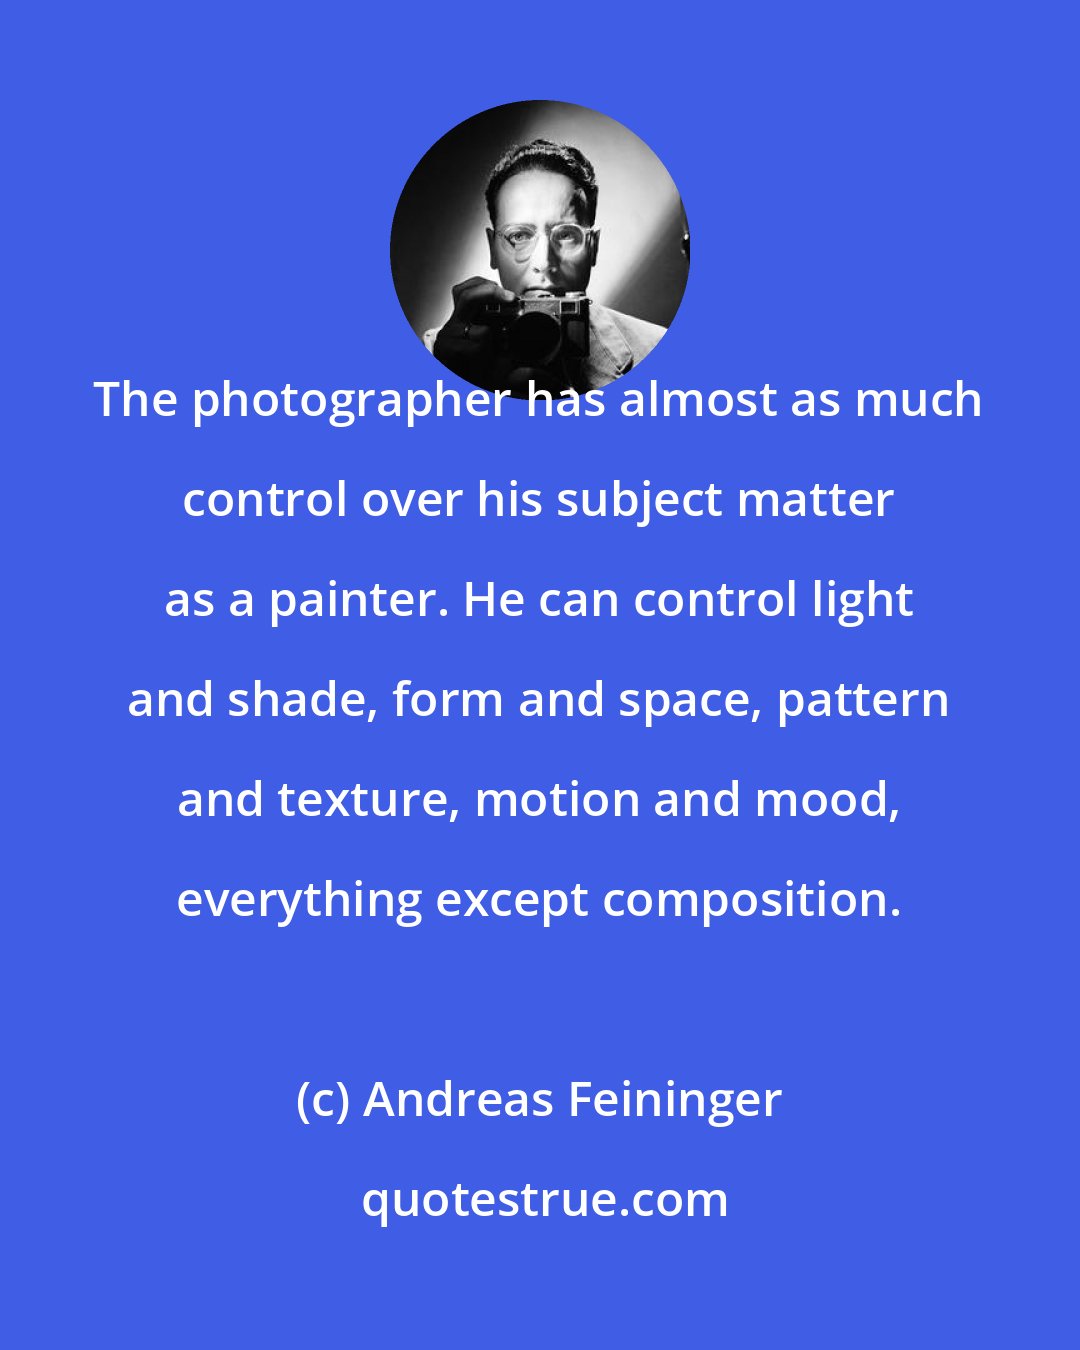 Andreas Feininger: The photographer has almost as much control over his subject matter as a painter. He can control light and shade, form and space, pattern and texture, motion and mood, everything except composition.